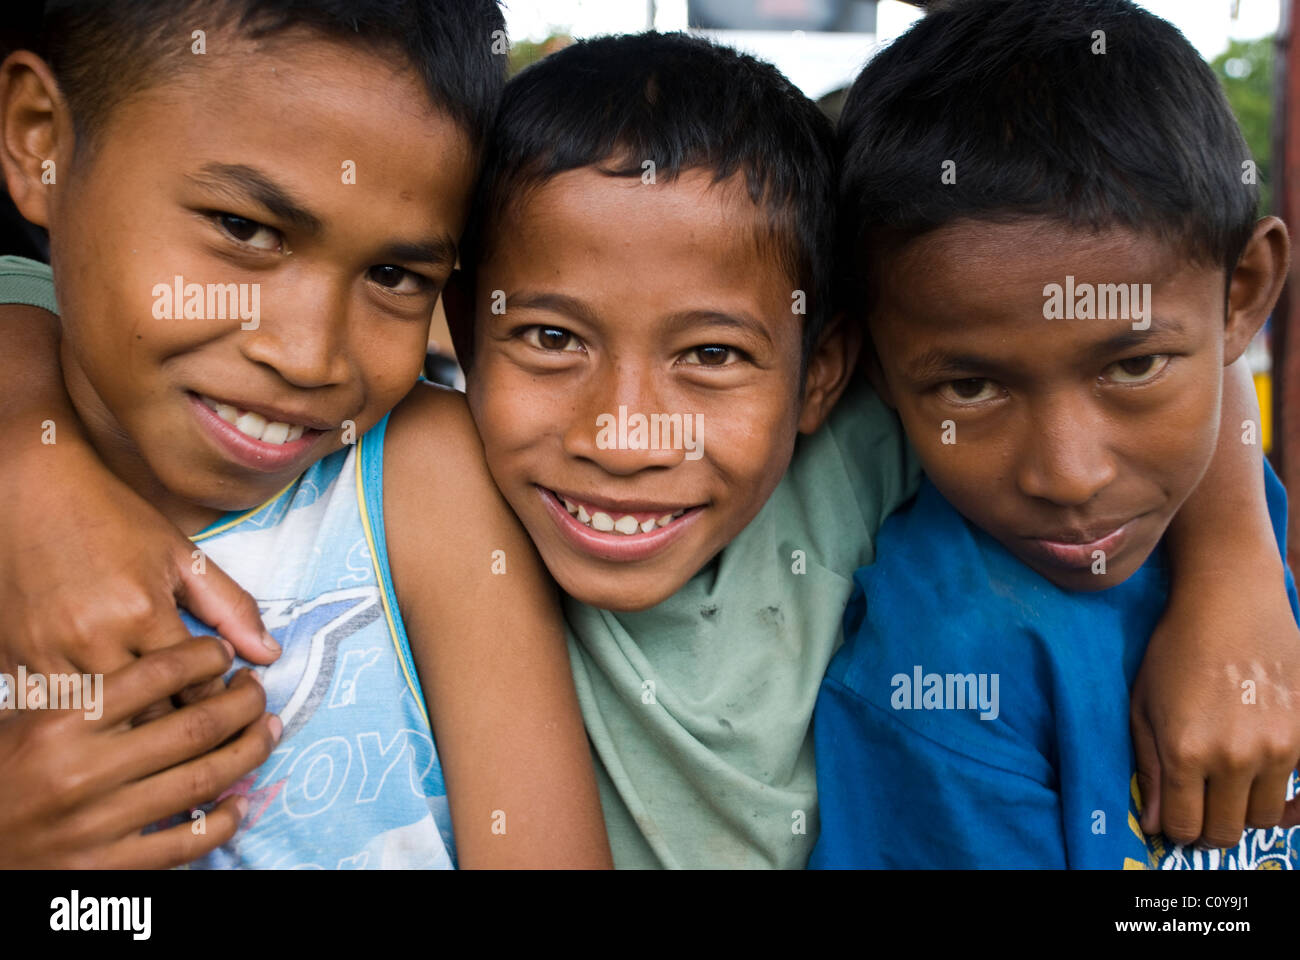 boys in kupang, west timor, indonesia Stock Photo